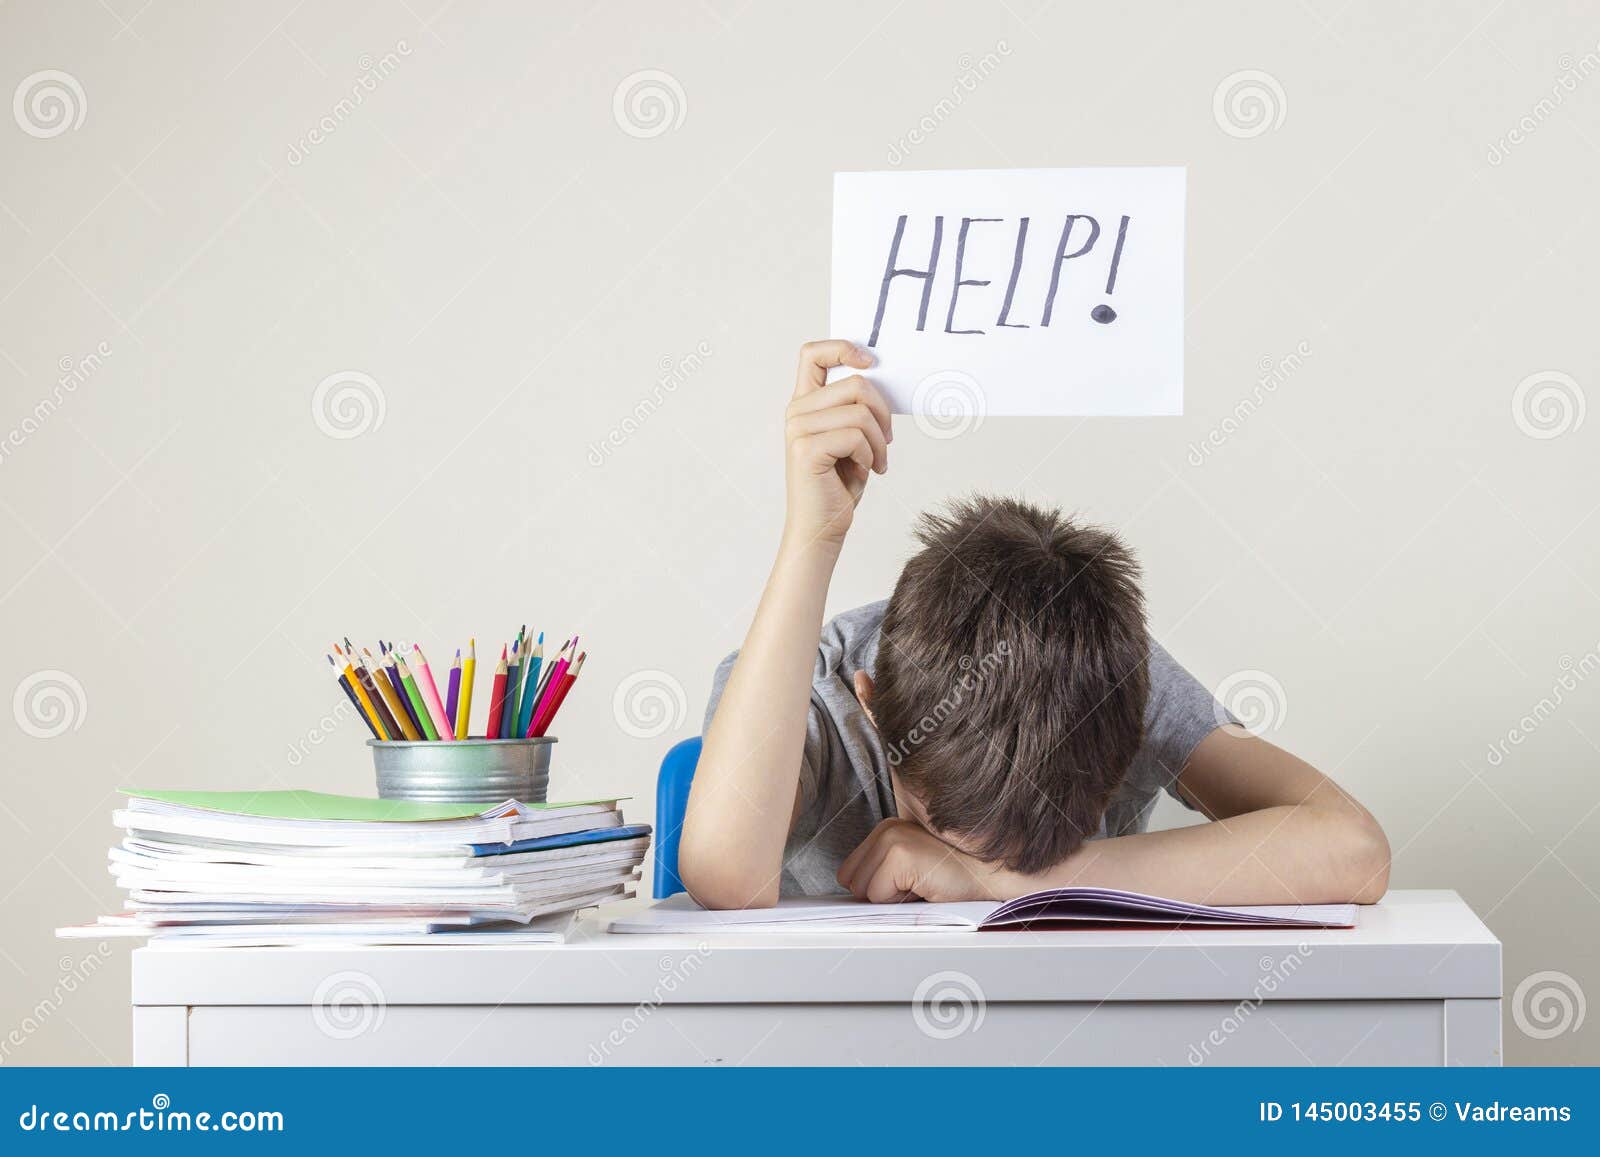 sad tired frustrated boy sitting at the table with many books and holding paper with word help. learning difficulties